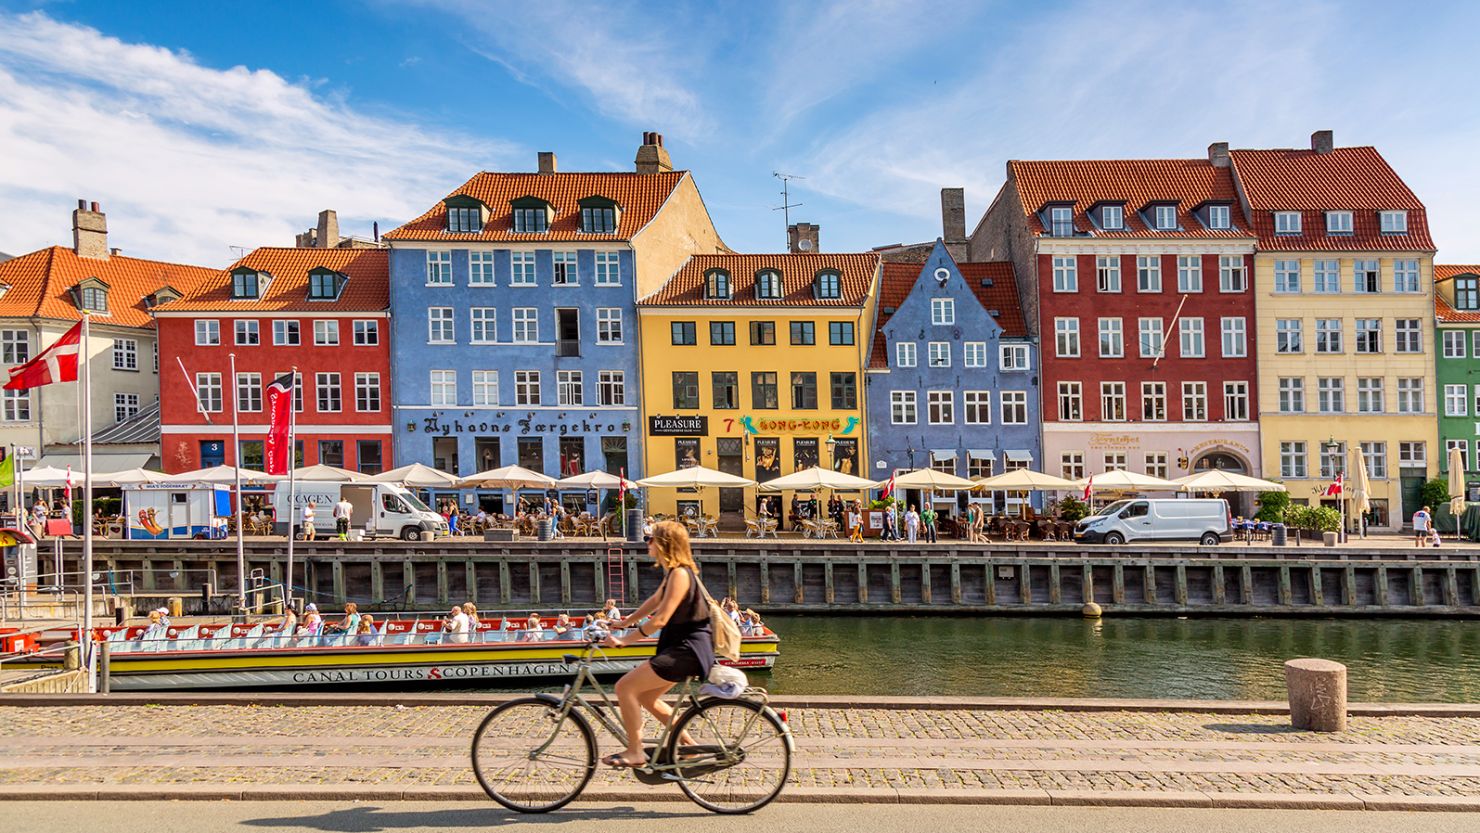 See the colorful Copenhagen waterfront by bicycle.